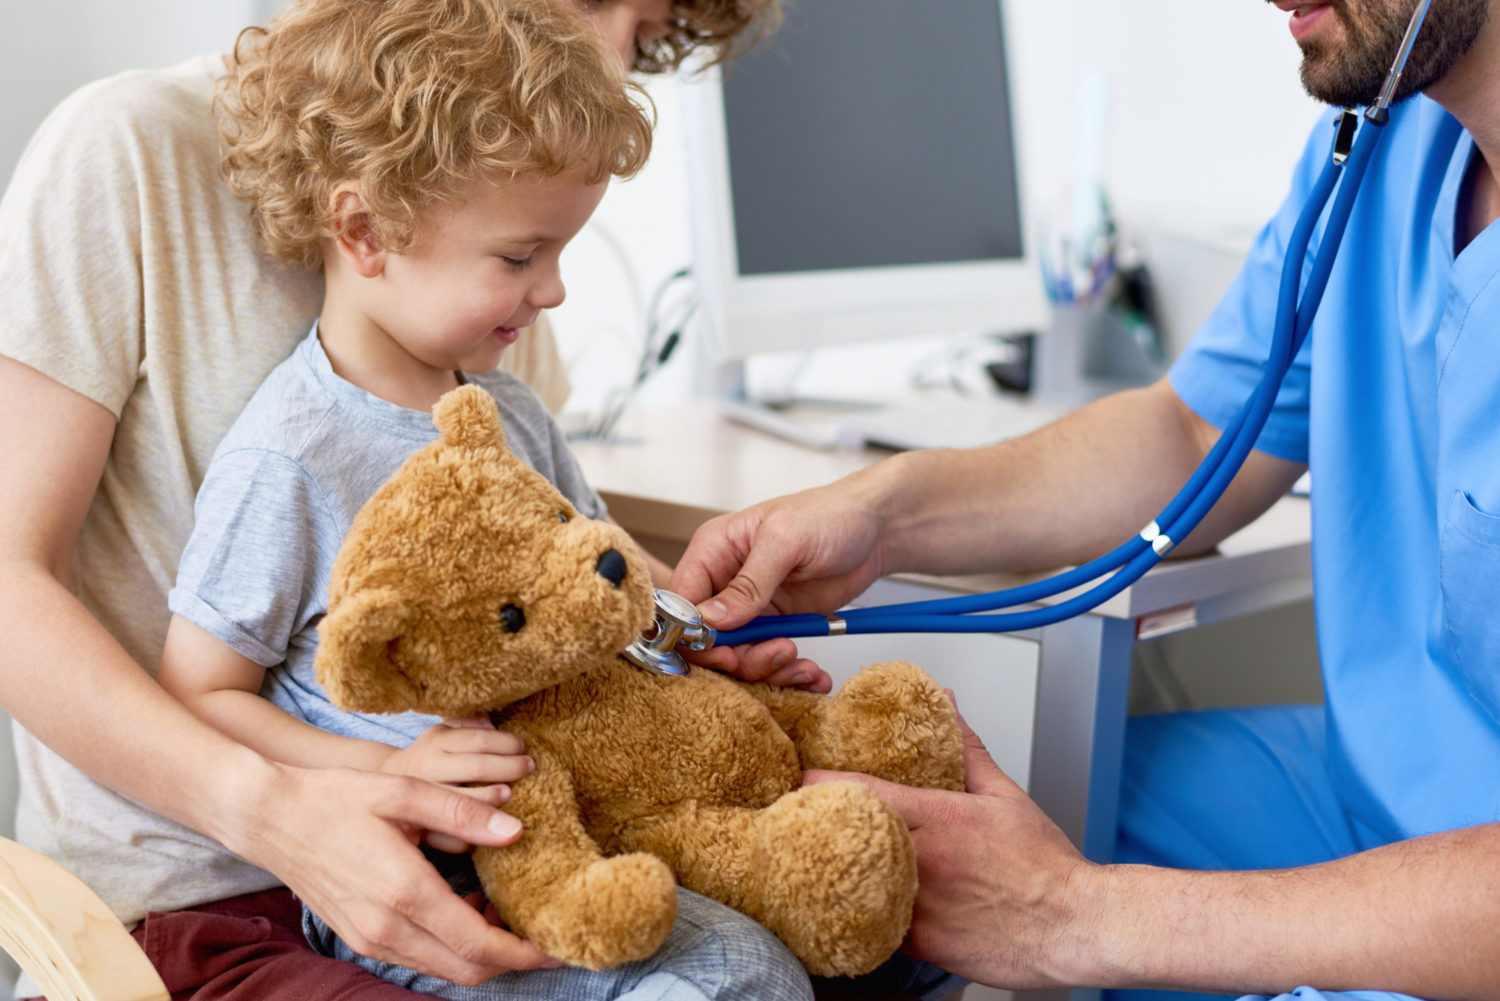 Portrait of adorable curly child  sitting on mothers lap in doctors office holding teddy bear toy, with pediatrician listening to heartbeat using stethoscope